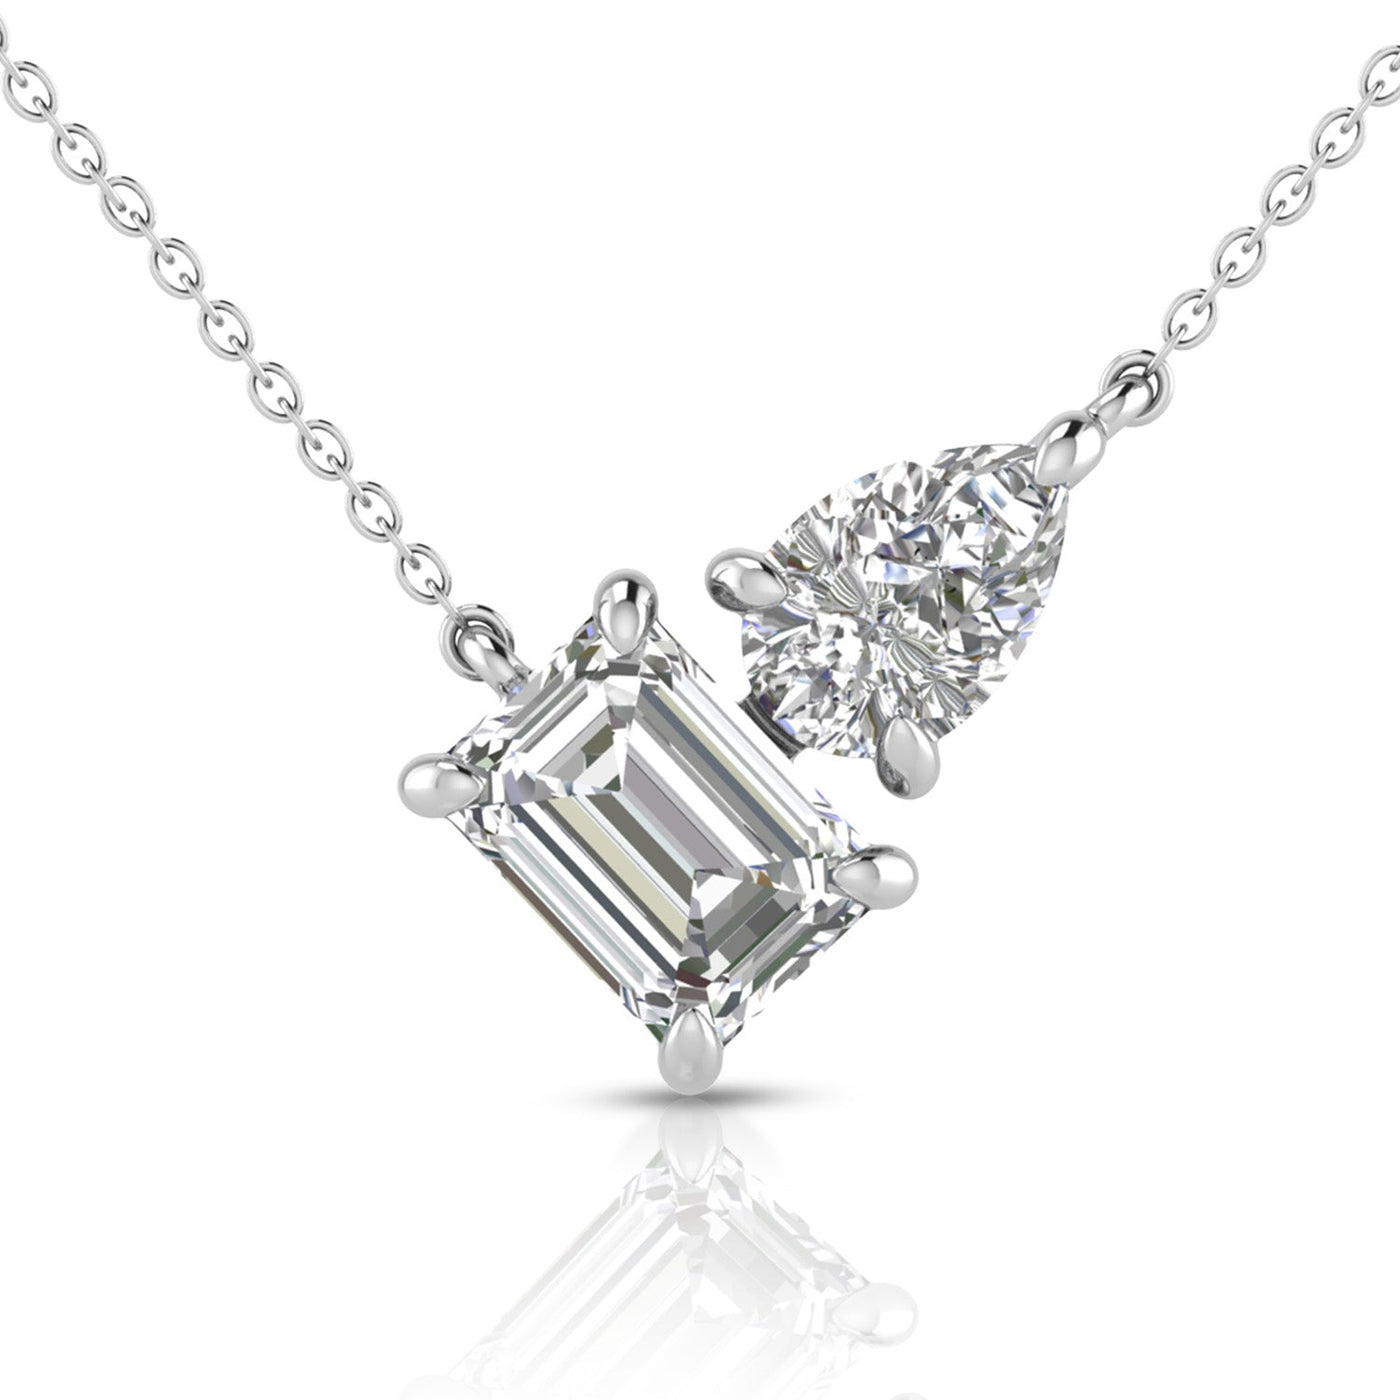 2.20ct Lab Grown Diamond Necklace in 18K White Gold